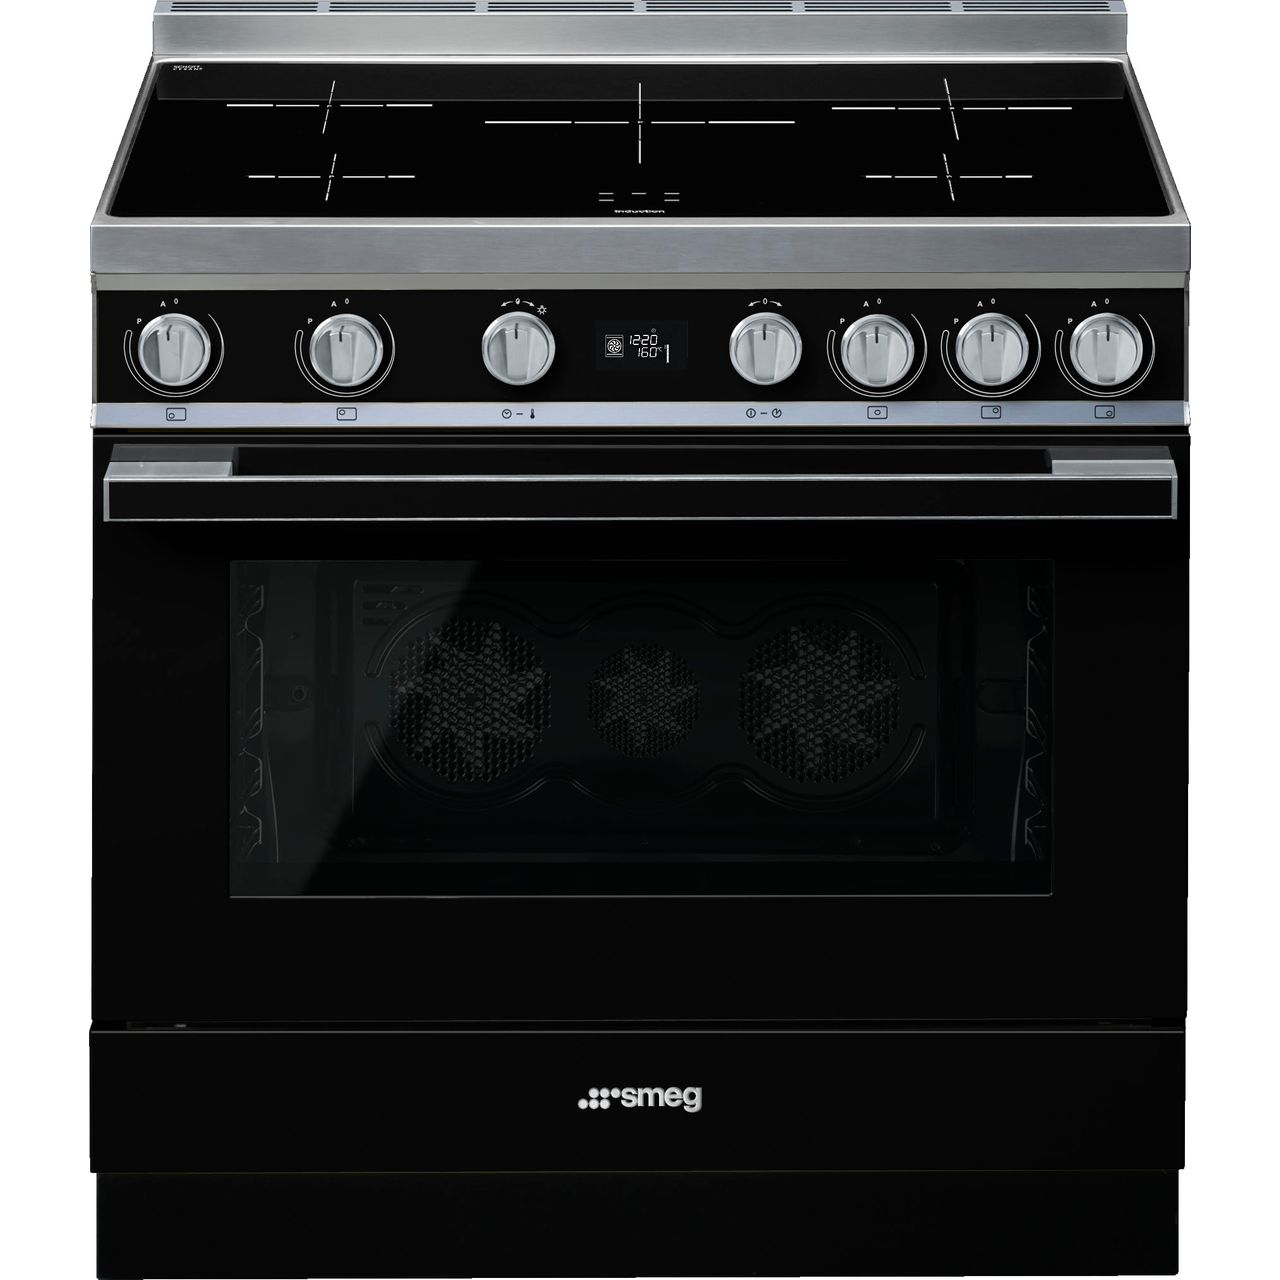 Smeg Portofino CPF9iPBL 90cm Electric Range Cooker with Induction Hob Review